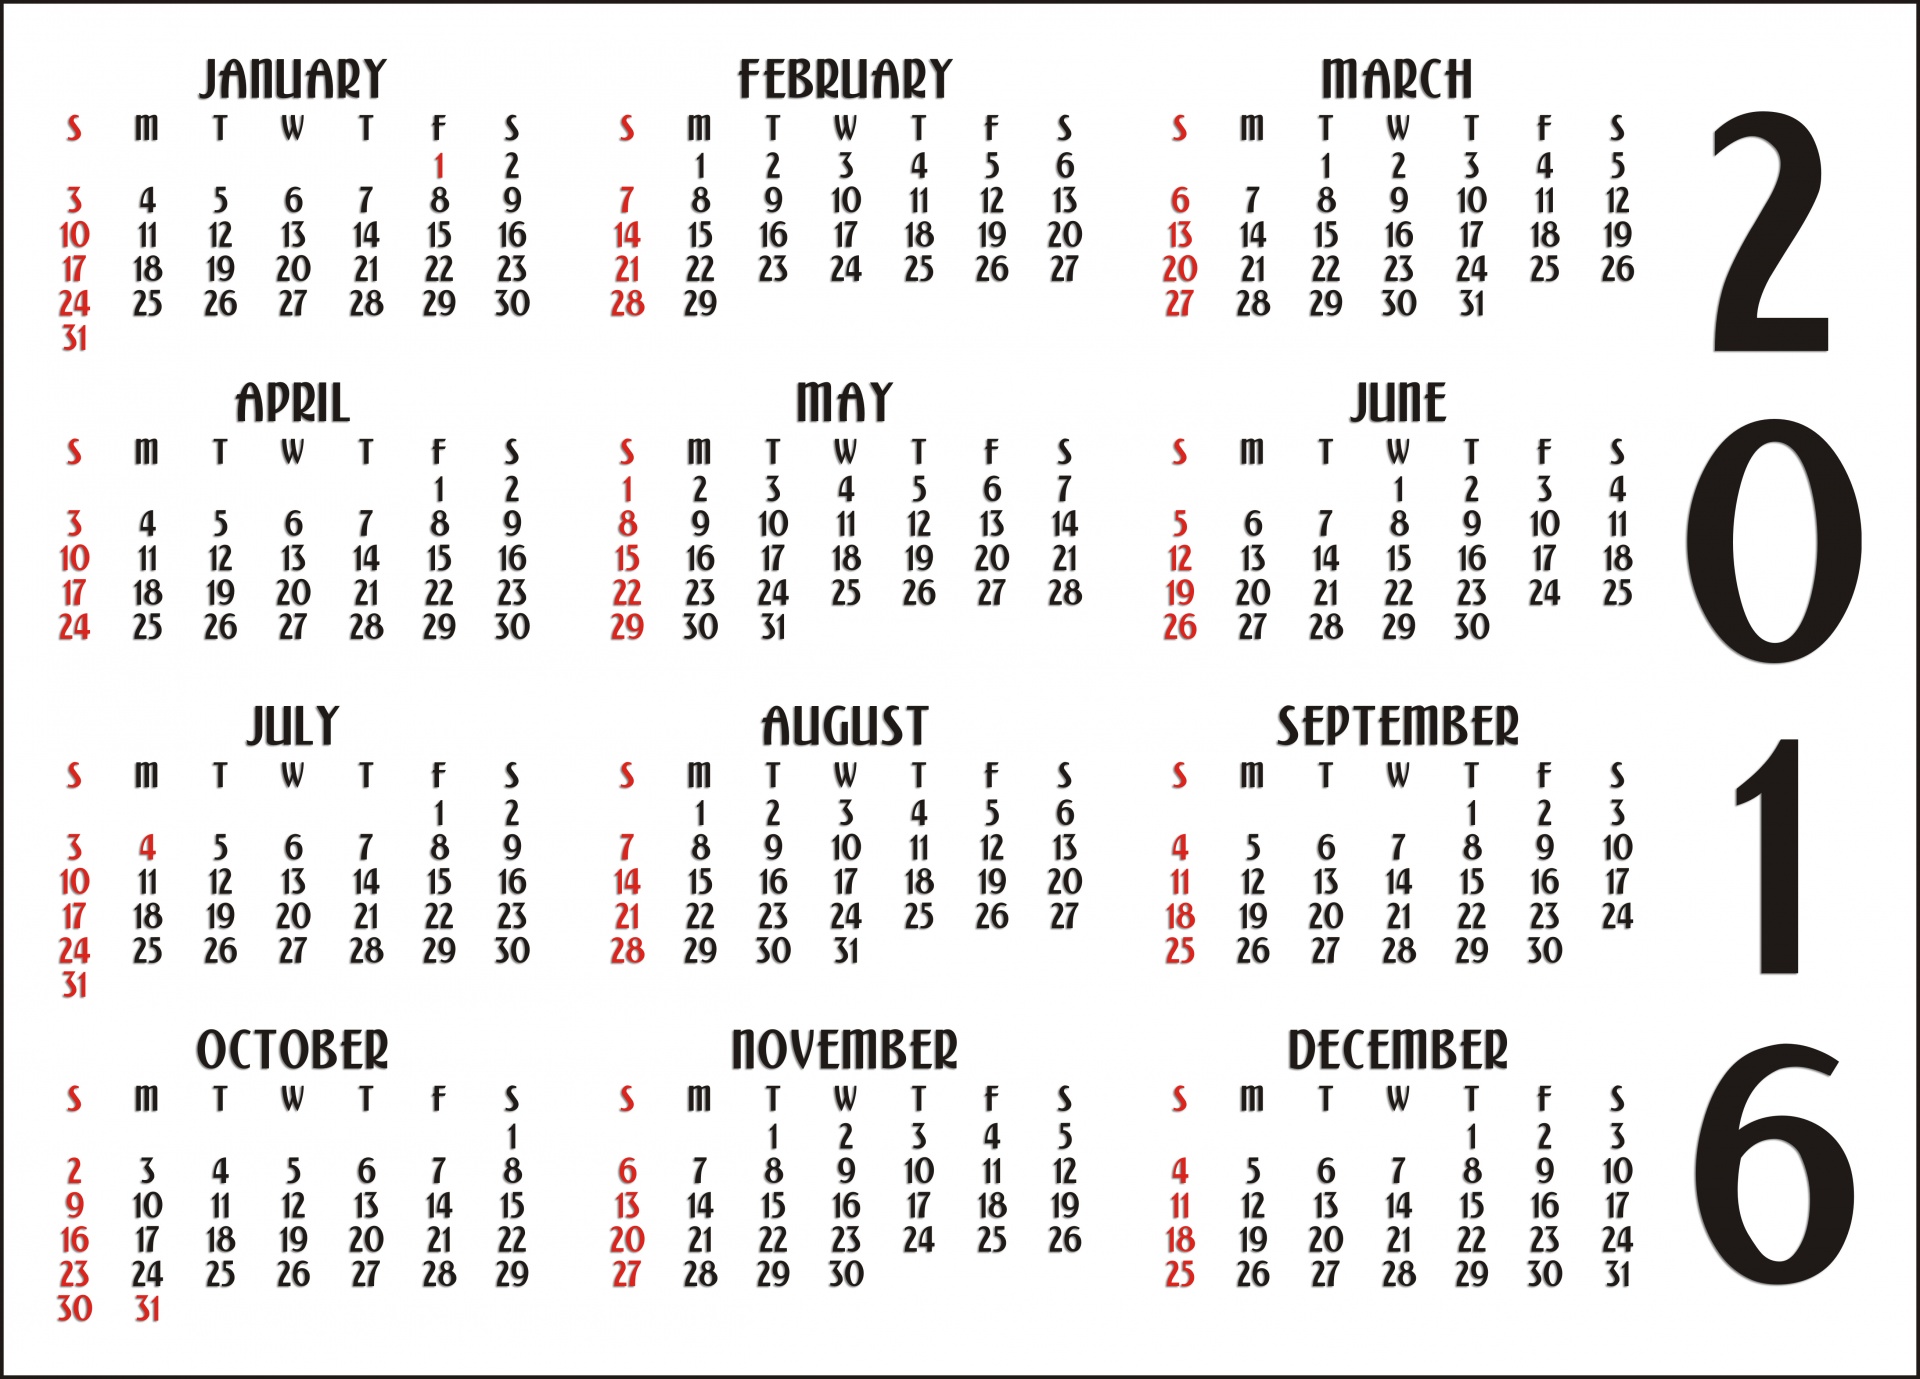 What is the Difference Between Fiscal Year and Calendar Year